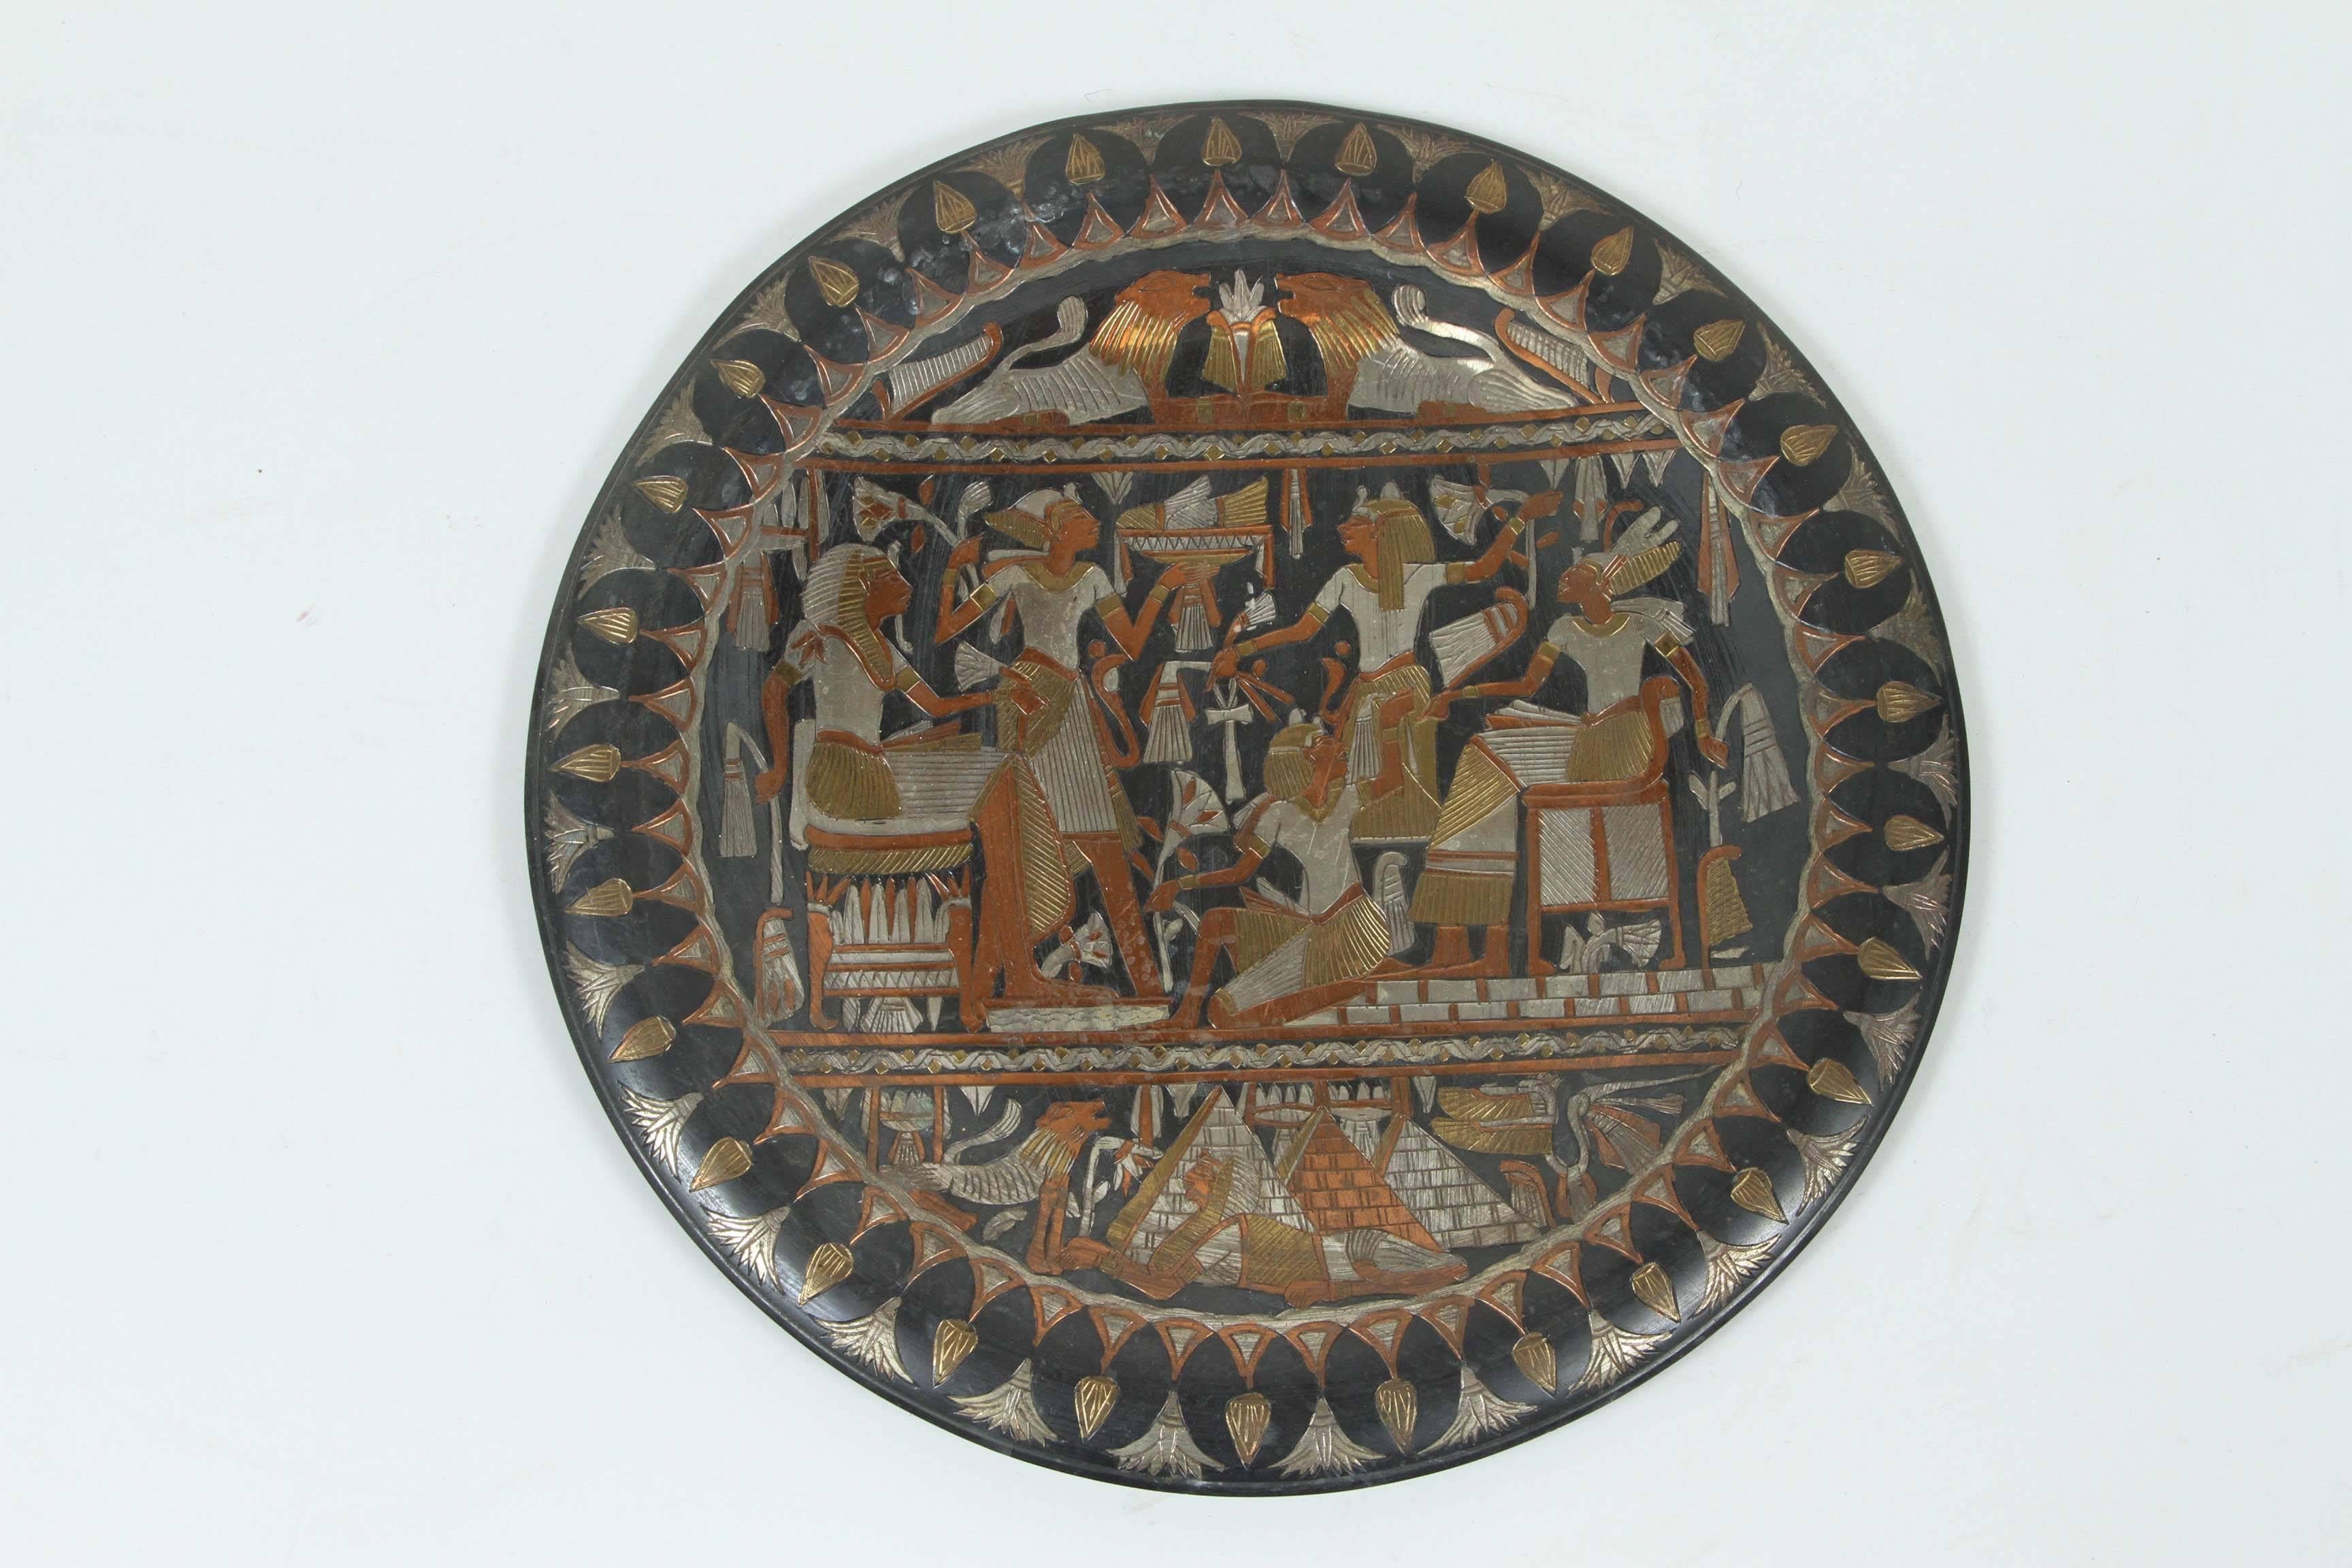 Egyptian wall hanging platter or tray, black background with Egyptian Pharaonic scene.
Hand-hammered and chased and inlay with different colors of metal.